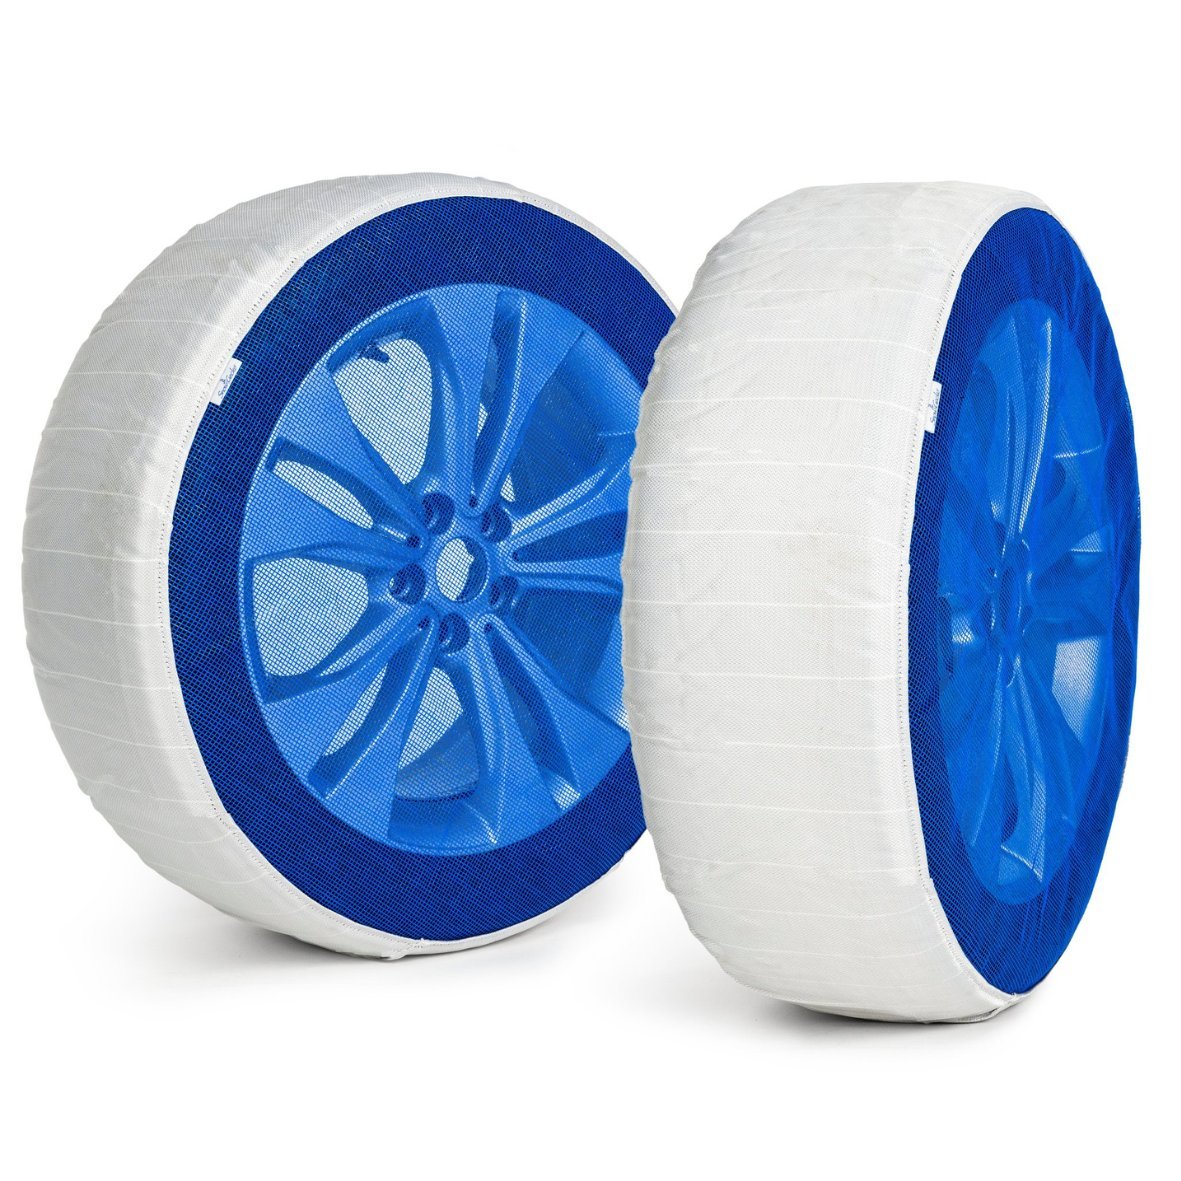 Pair of SnowGecko Large L textile snow chains installed on two wheels in front of white background showing product frontside